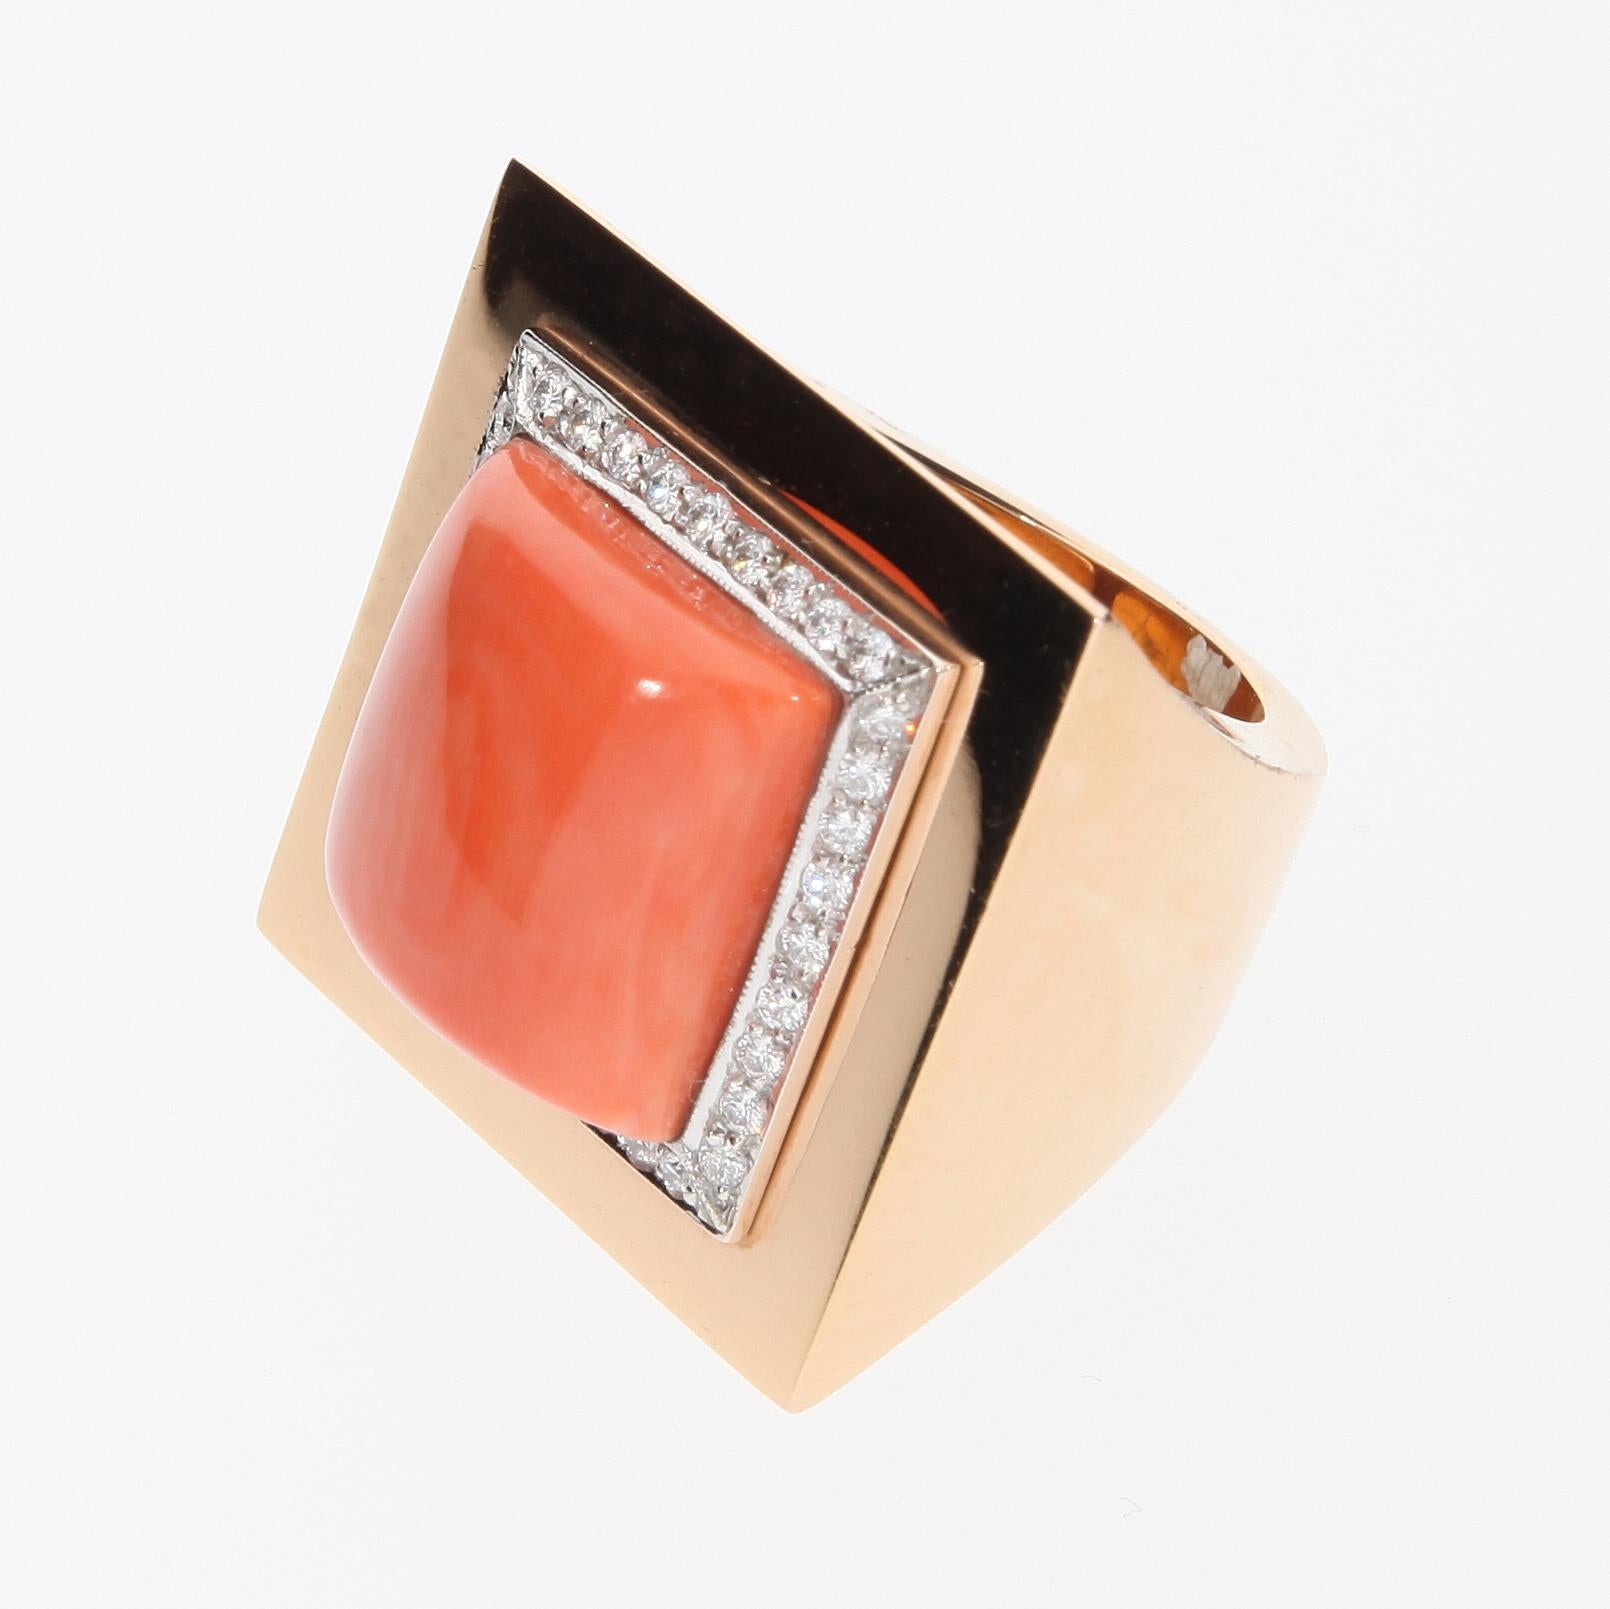 Salmon Coral Ring Surrounded by 36 Diamonds. 18 Kt Rose Gold. Handmade in Italy. For Sale 3